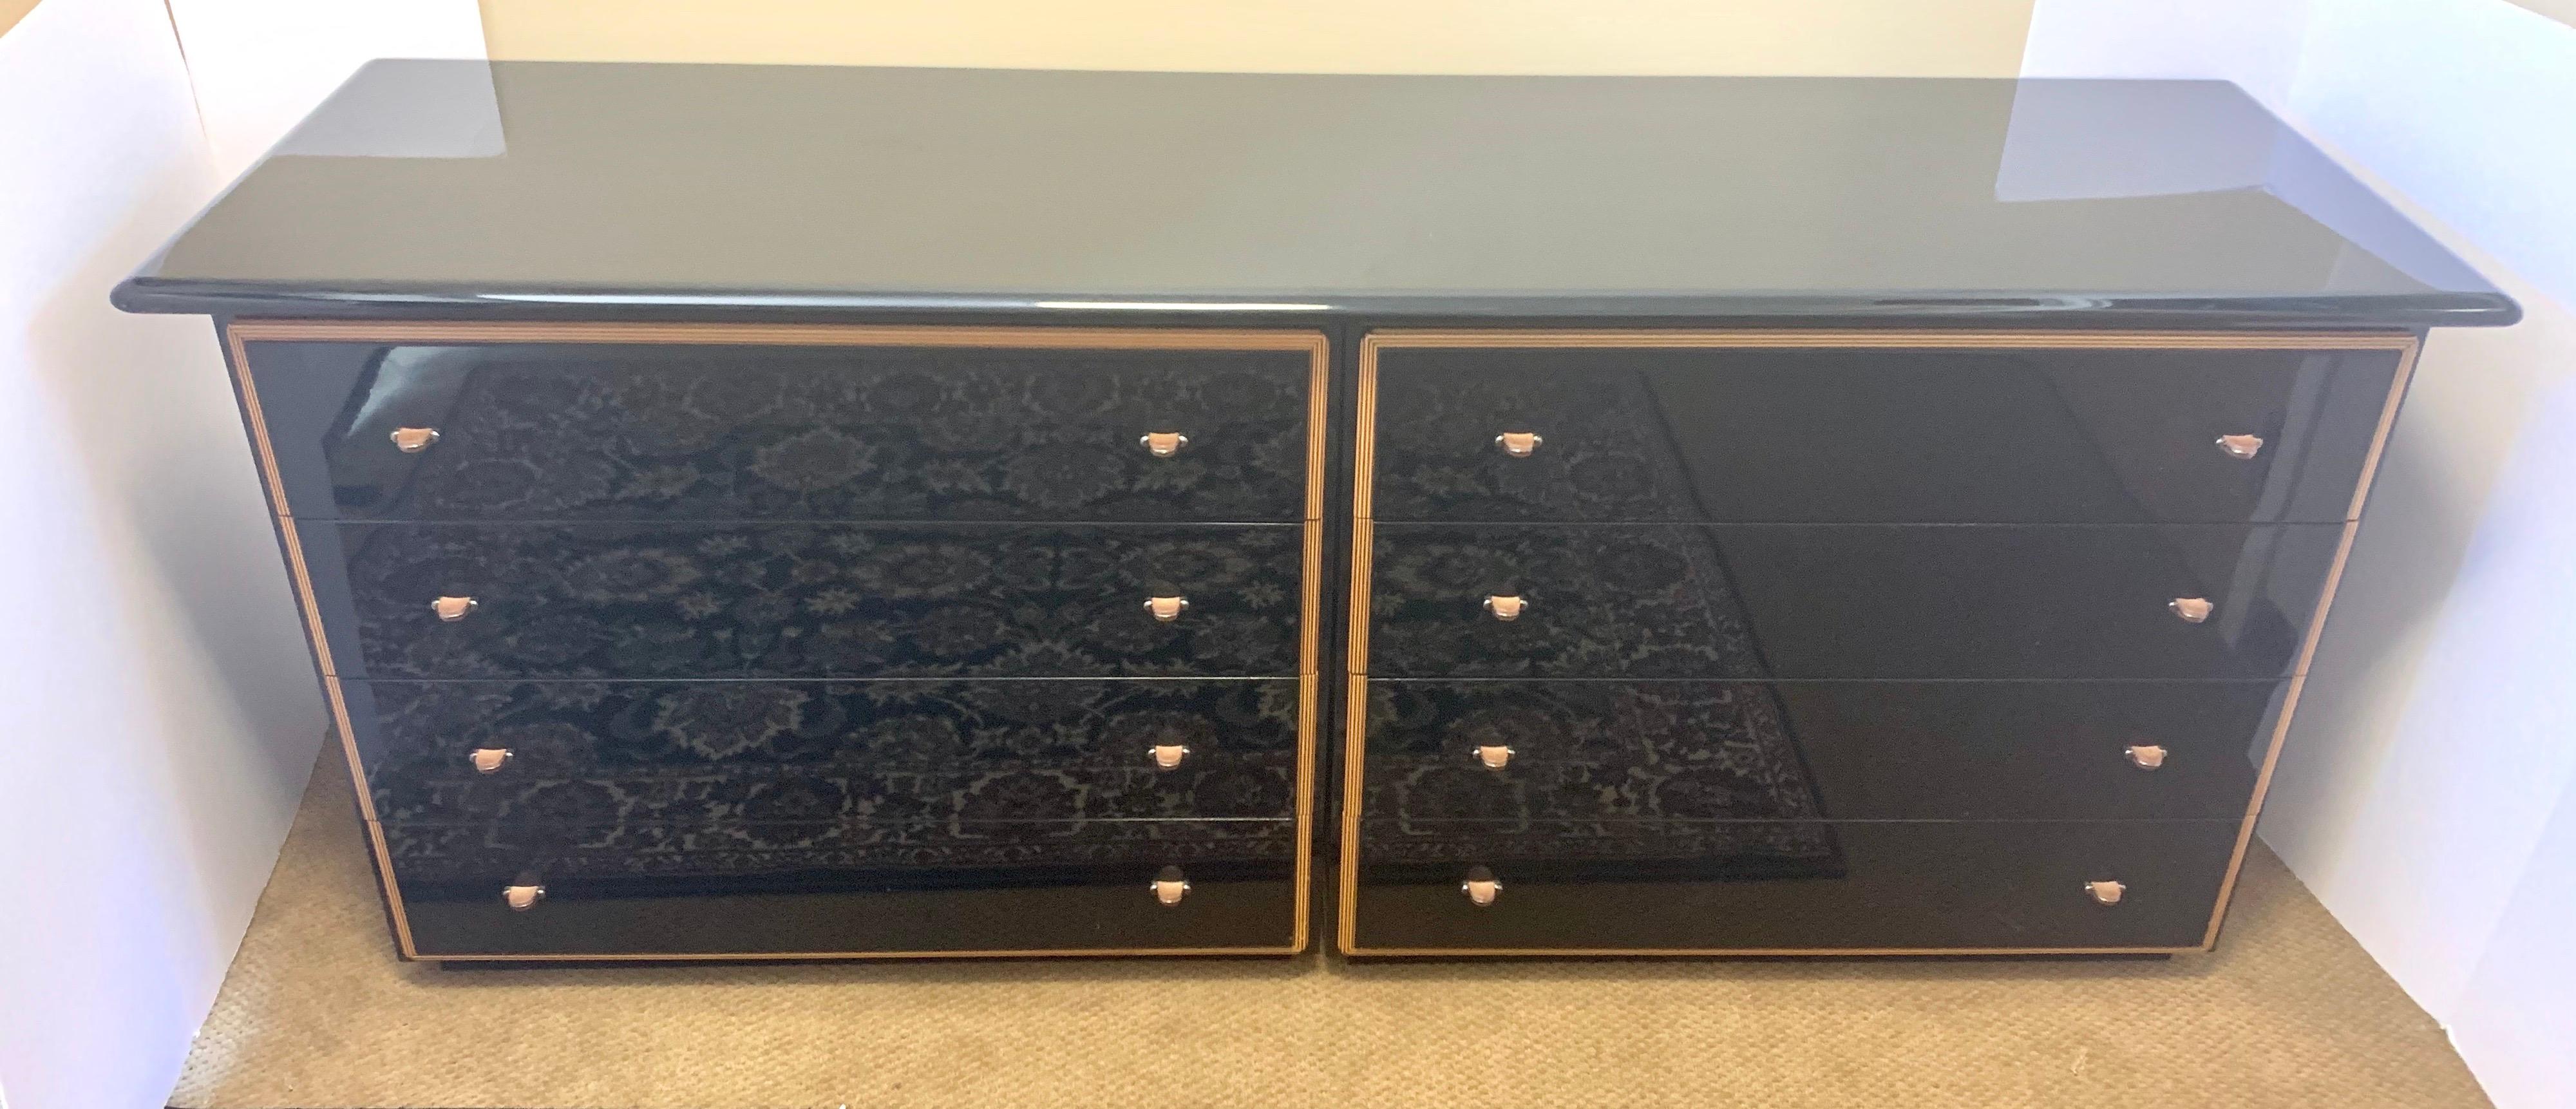 Italian Roche Bobois Signed Black Lacquered Dresser Chest Credenza Sideboard Buffet